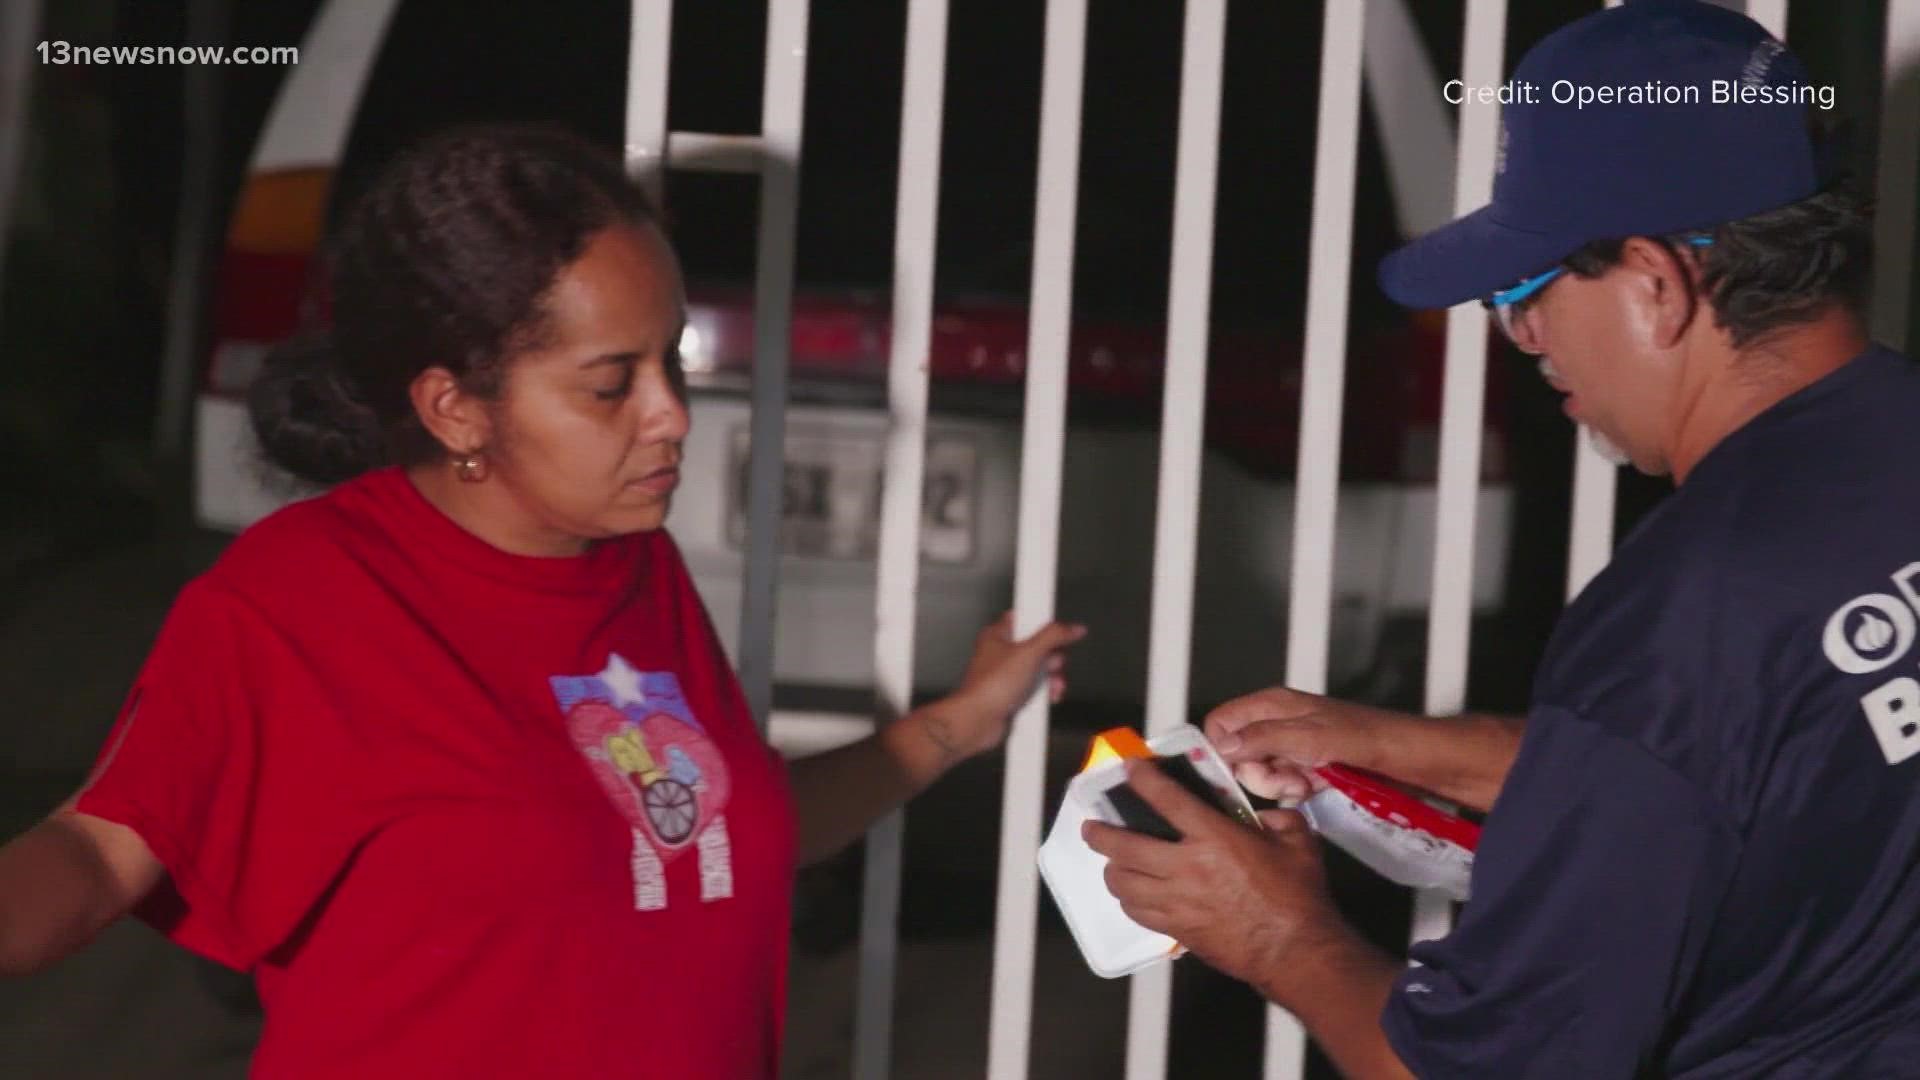 Volunteers with Operation Blessing are helping people on the ground in Puerto Rico. The group is handing out safety and light kits to all those who lost power.